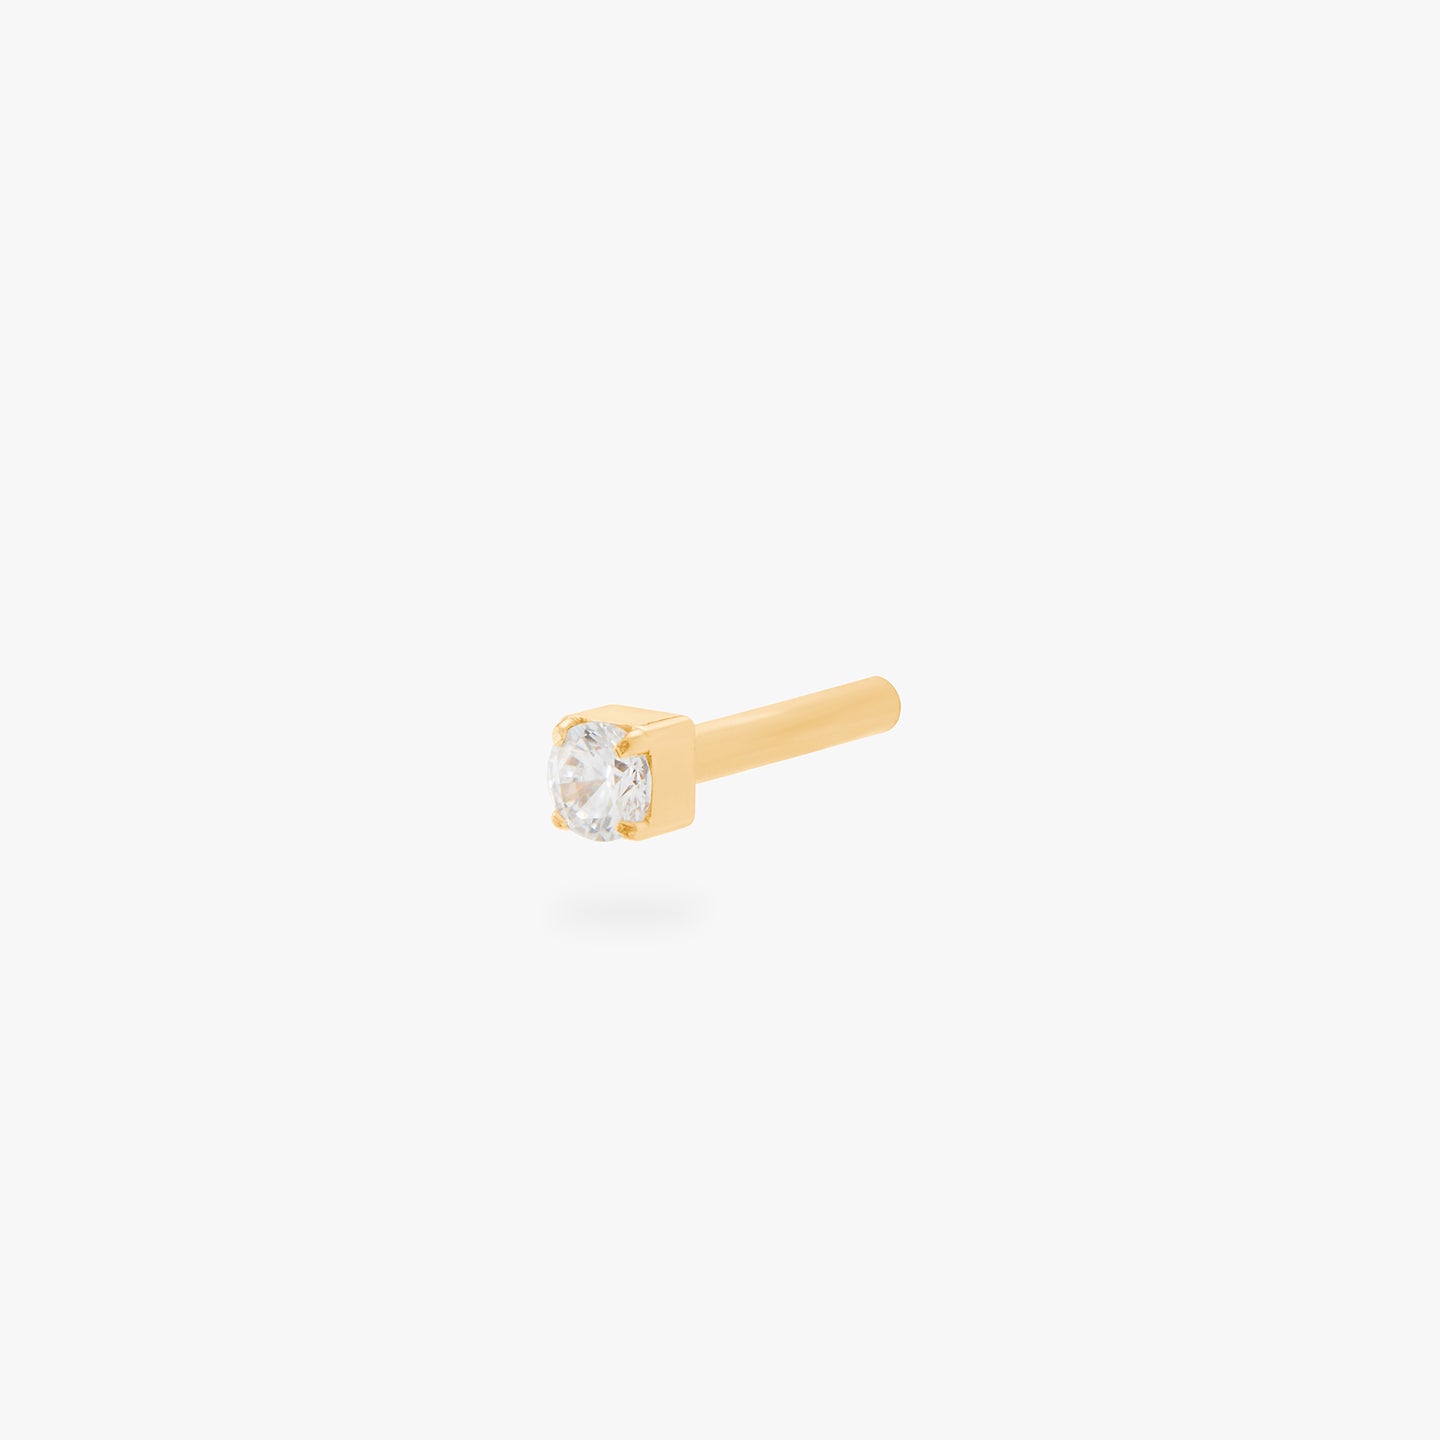 This is an image of a 6mm length gold/clear flatback post with a mini CZ shaped disc. [hover] color:null|8mm